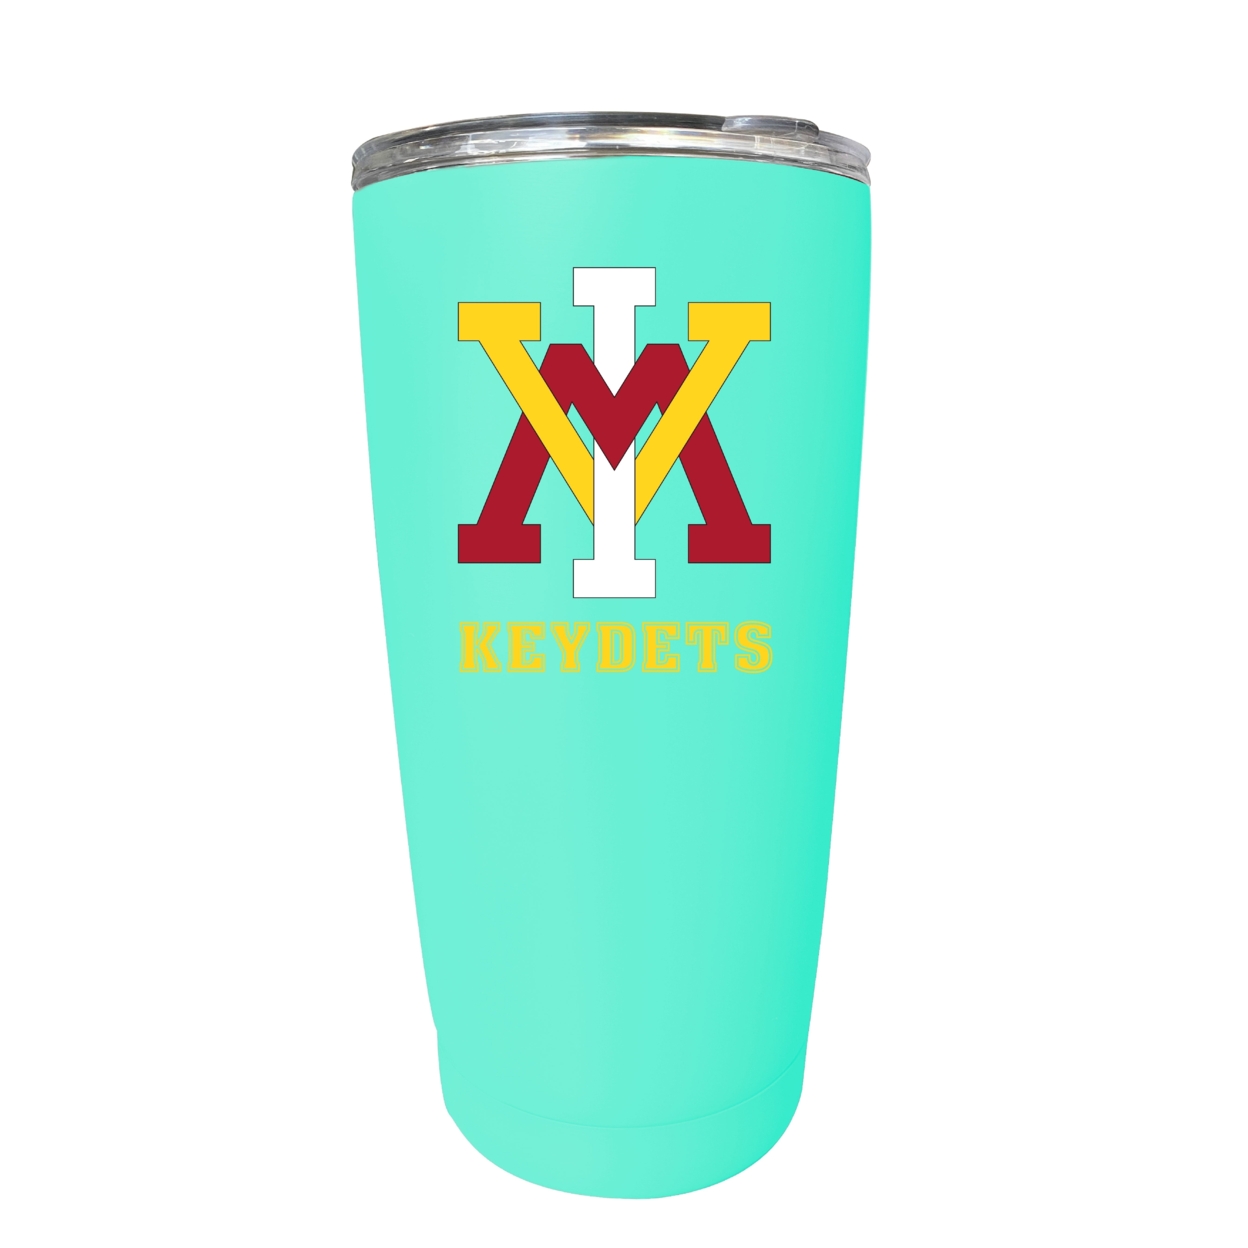 VMI Keydets 16 Oz Insulated Stainless Steel Tumbler - Choose Your Color. - Red